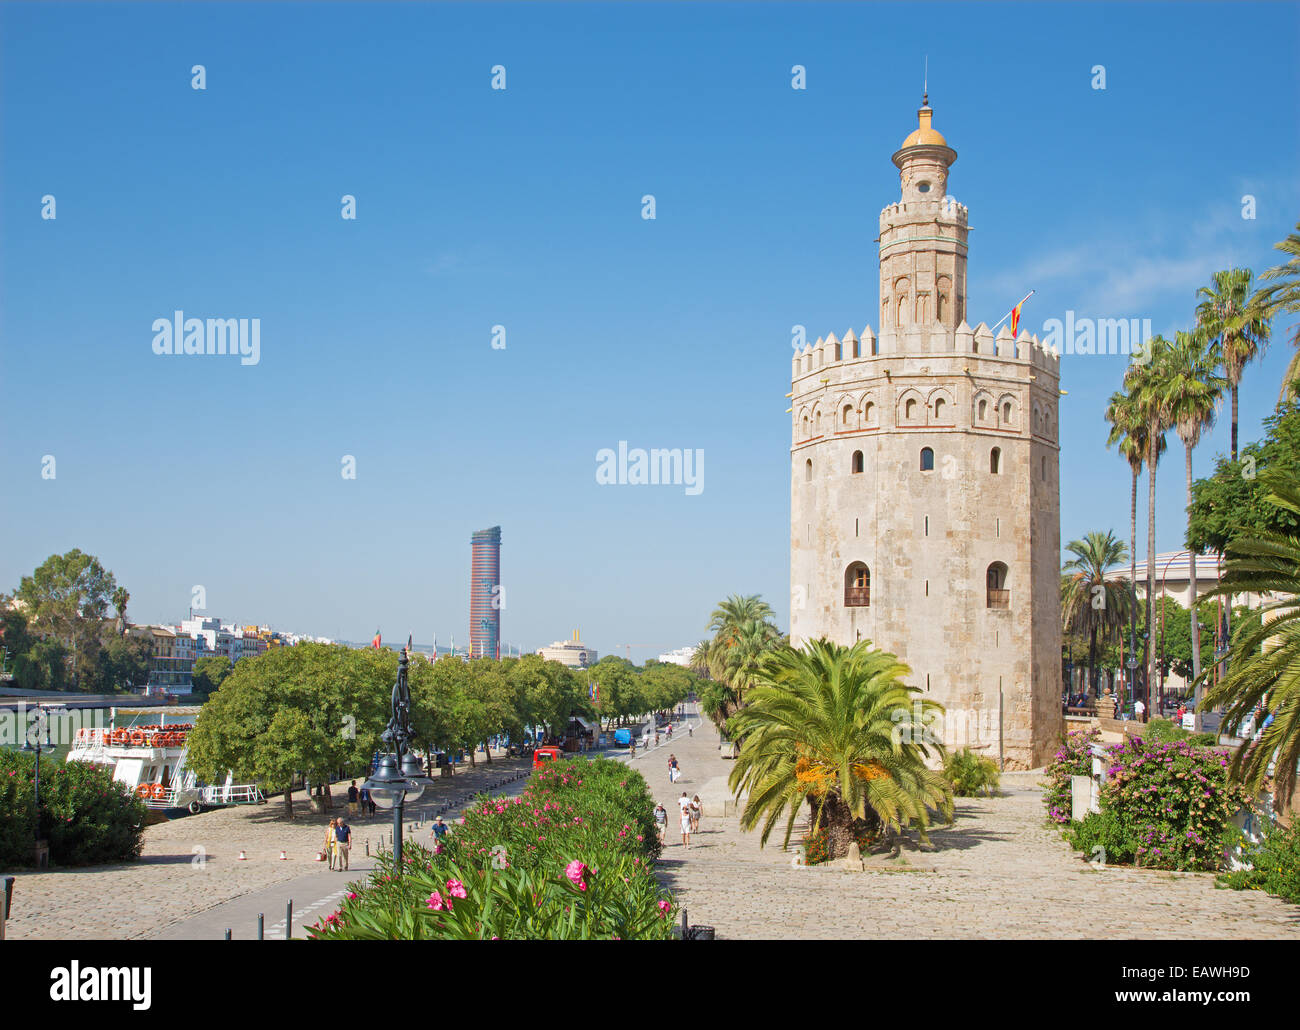 SEVILLE, SPAIN - OCTOBER 29, 2014: The medieval tower Torre del Oro, promenade and modern Torre Cajasol in background. Stock Photo